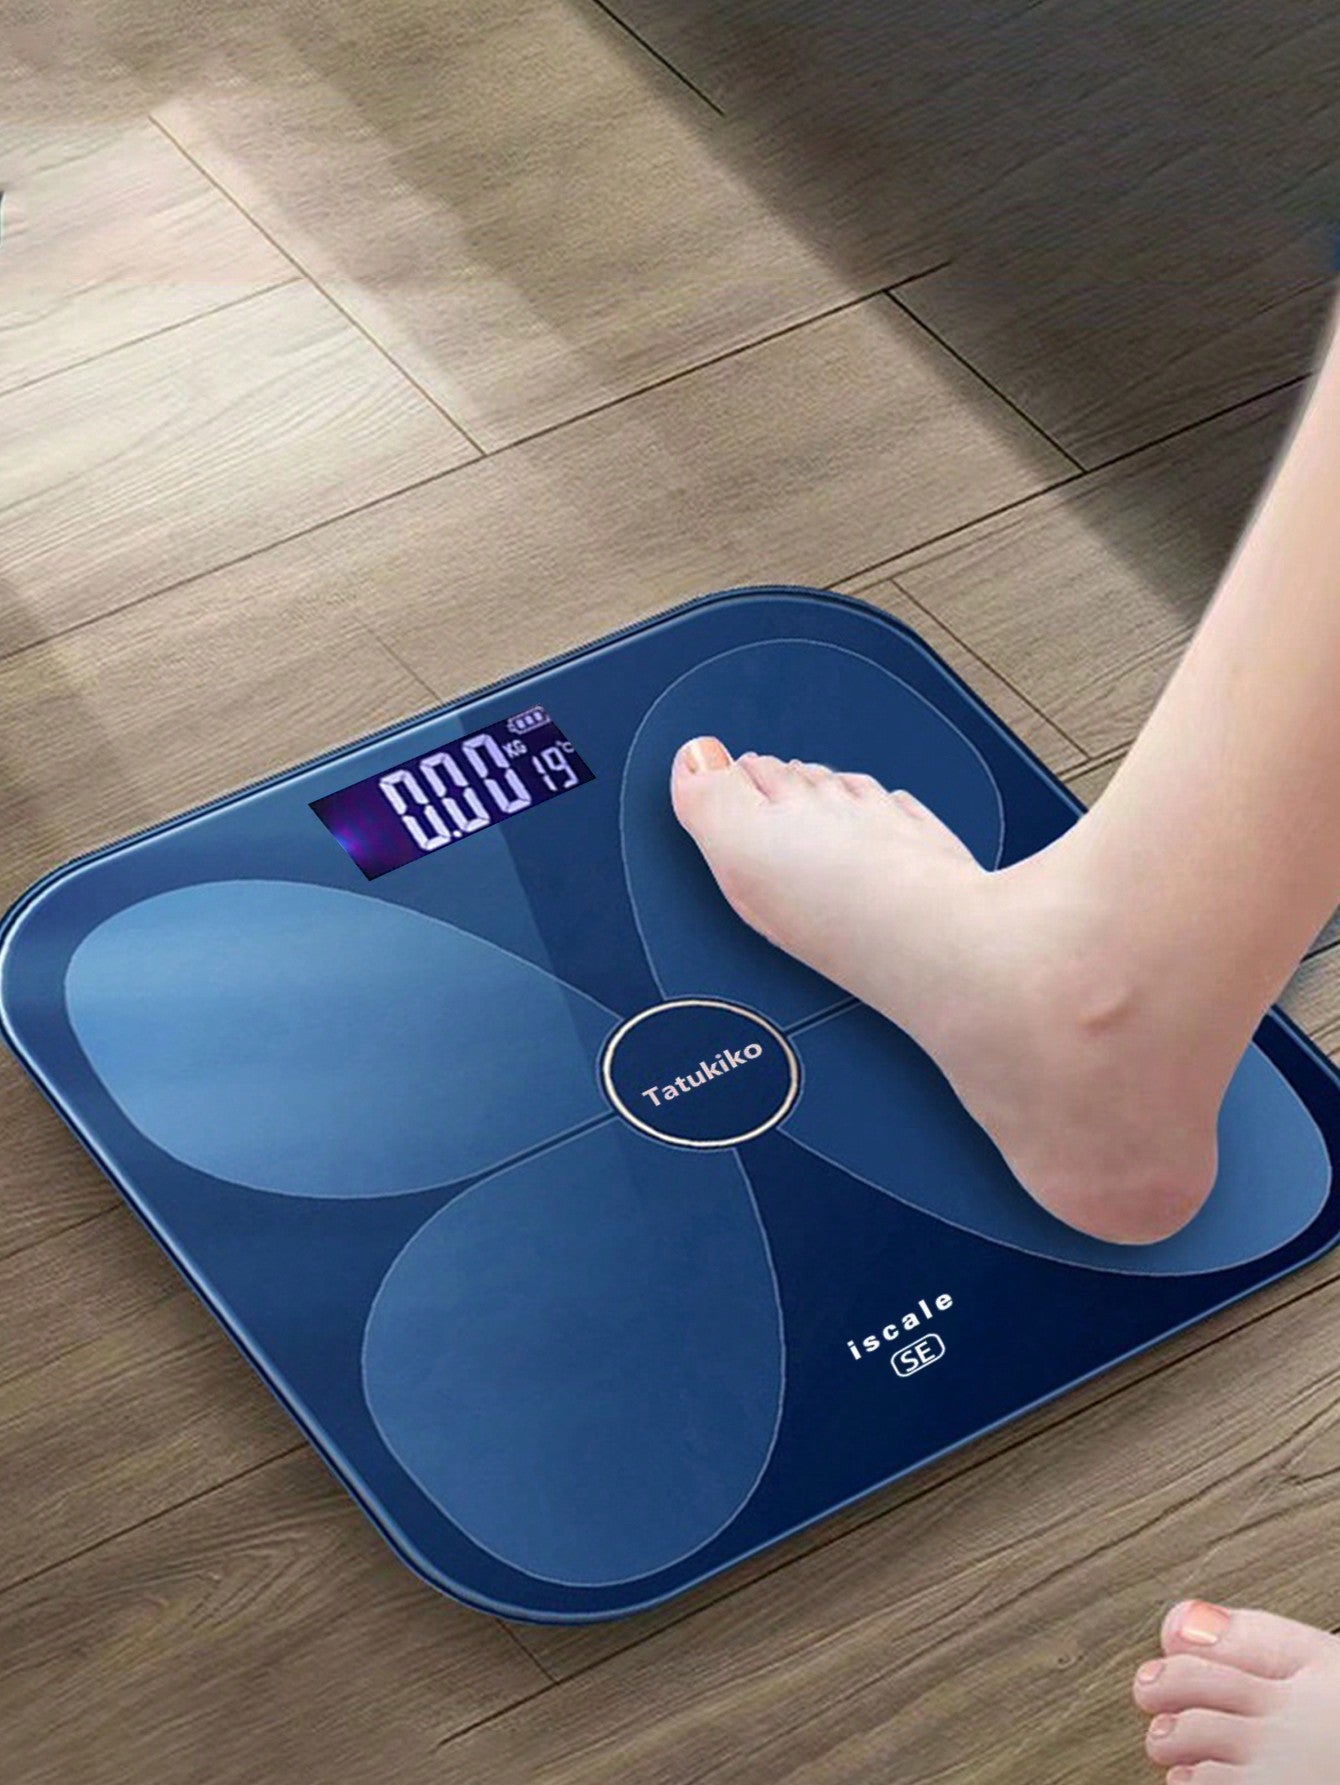 1pc smart body fat scale household body weight scale adult